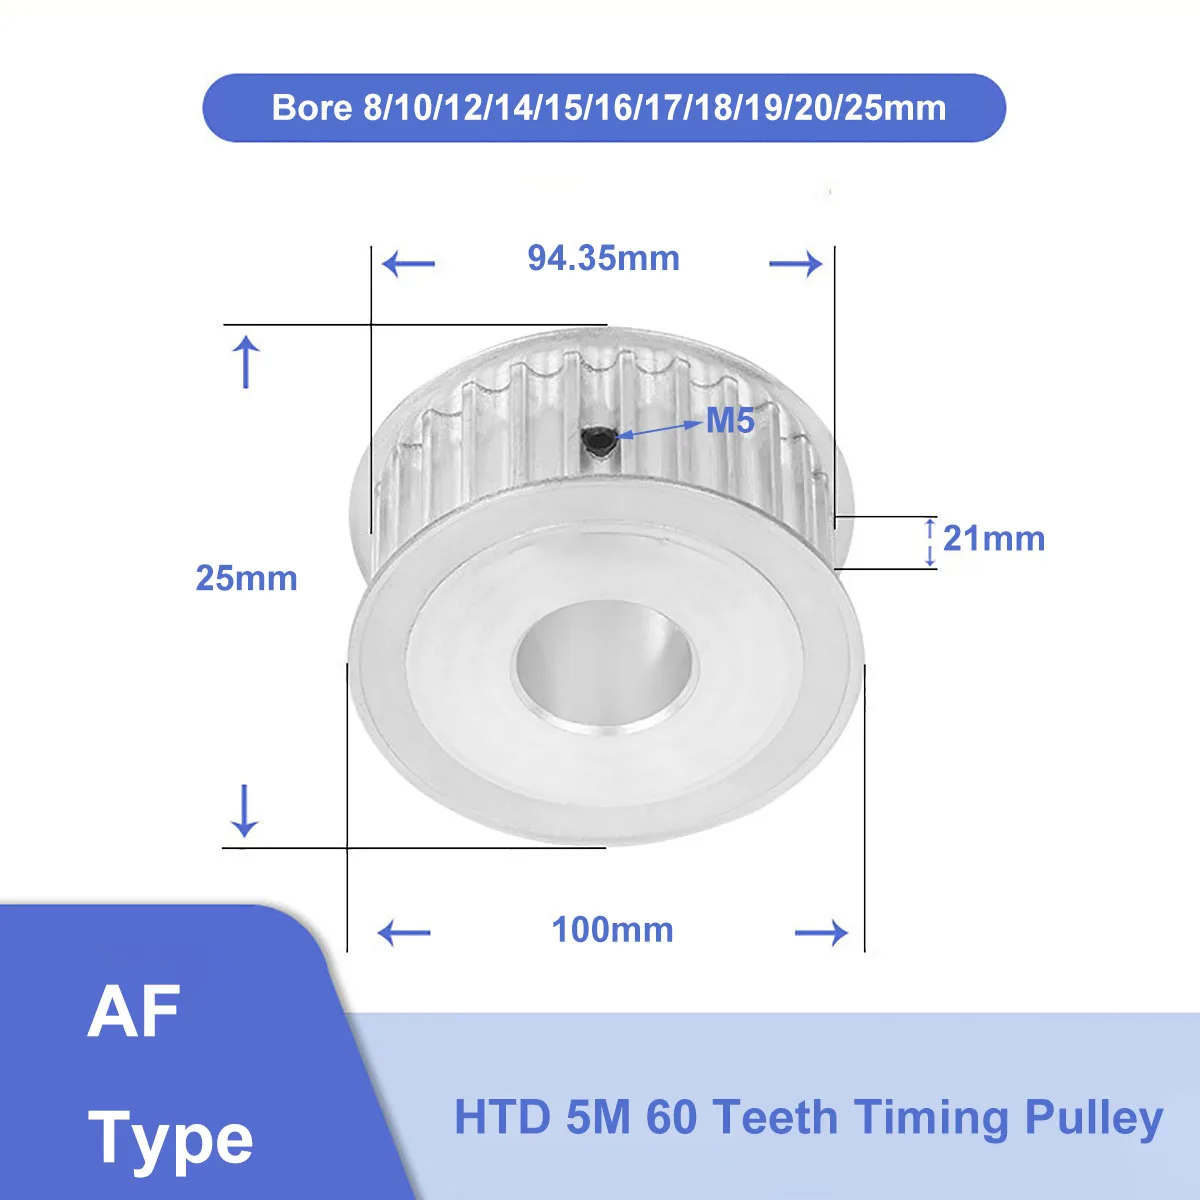 

HTD 5M 25 Teeth Timing Pulley Synchronus Wheel Bore 6mm - 25mm Aluminium Idler Pulley 5M-25T 21mm Width For HTD5M Timing Belt